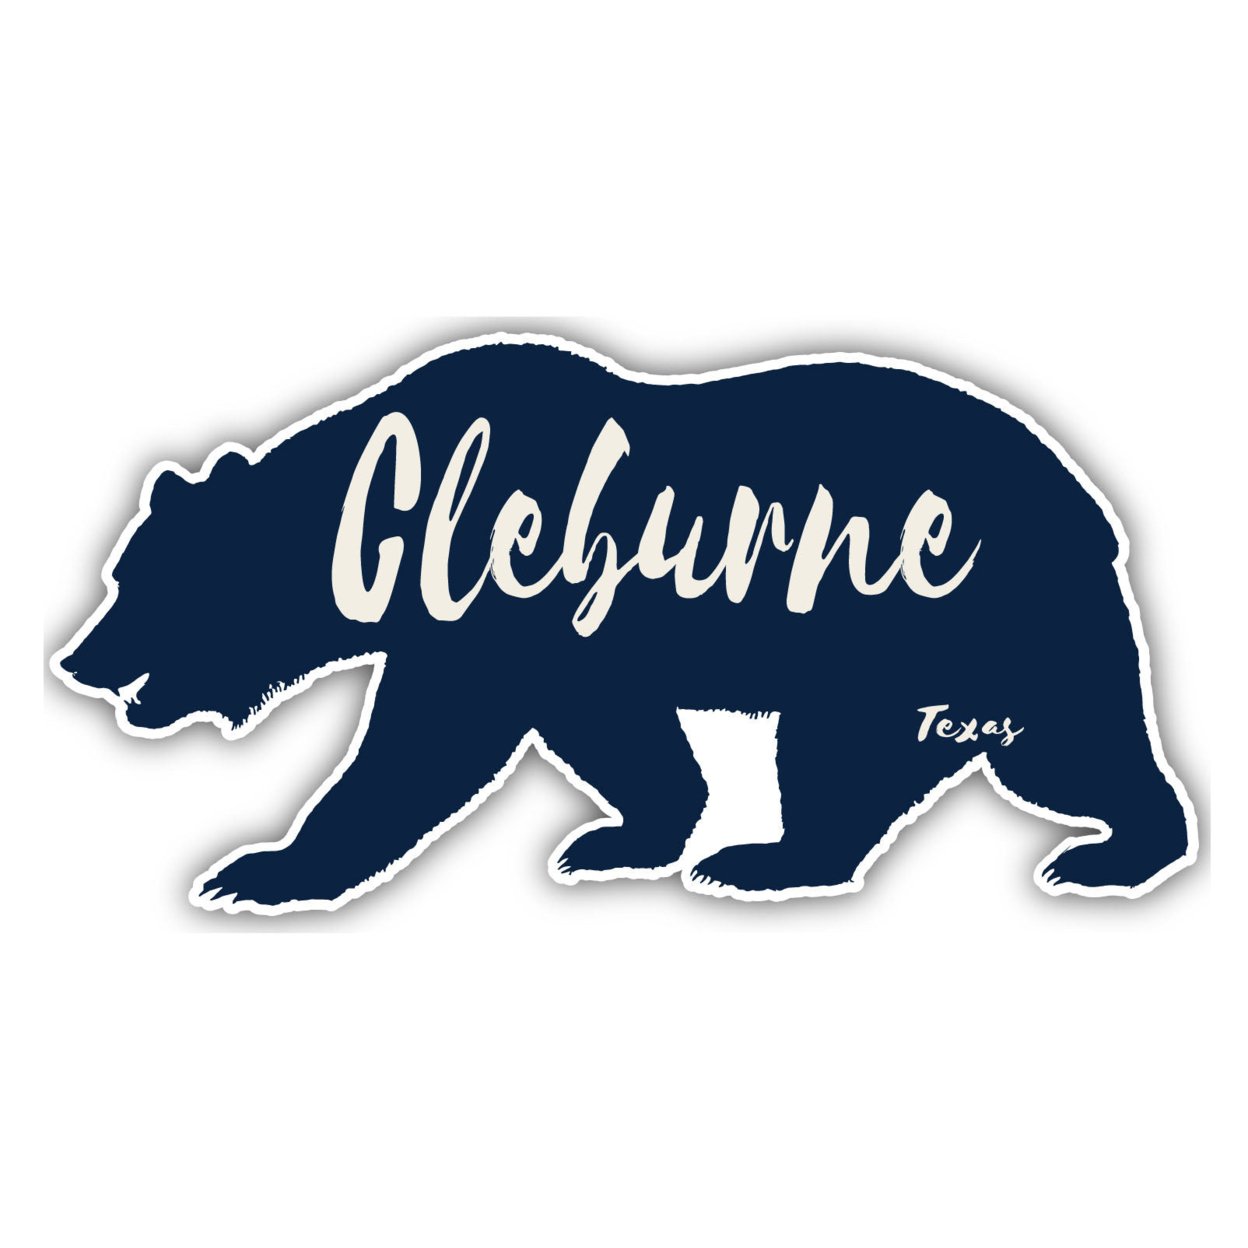 Cleburne Texas Souvenir Decorative Stickers (Choose Theme And Size) - 4-Pack, 4-Inch, Bear